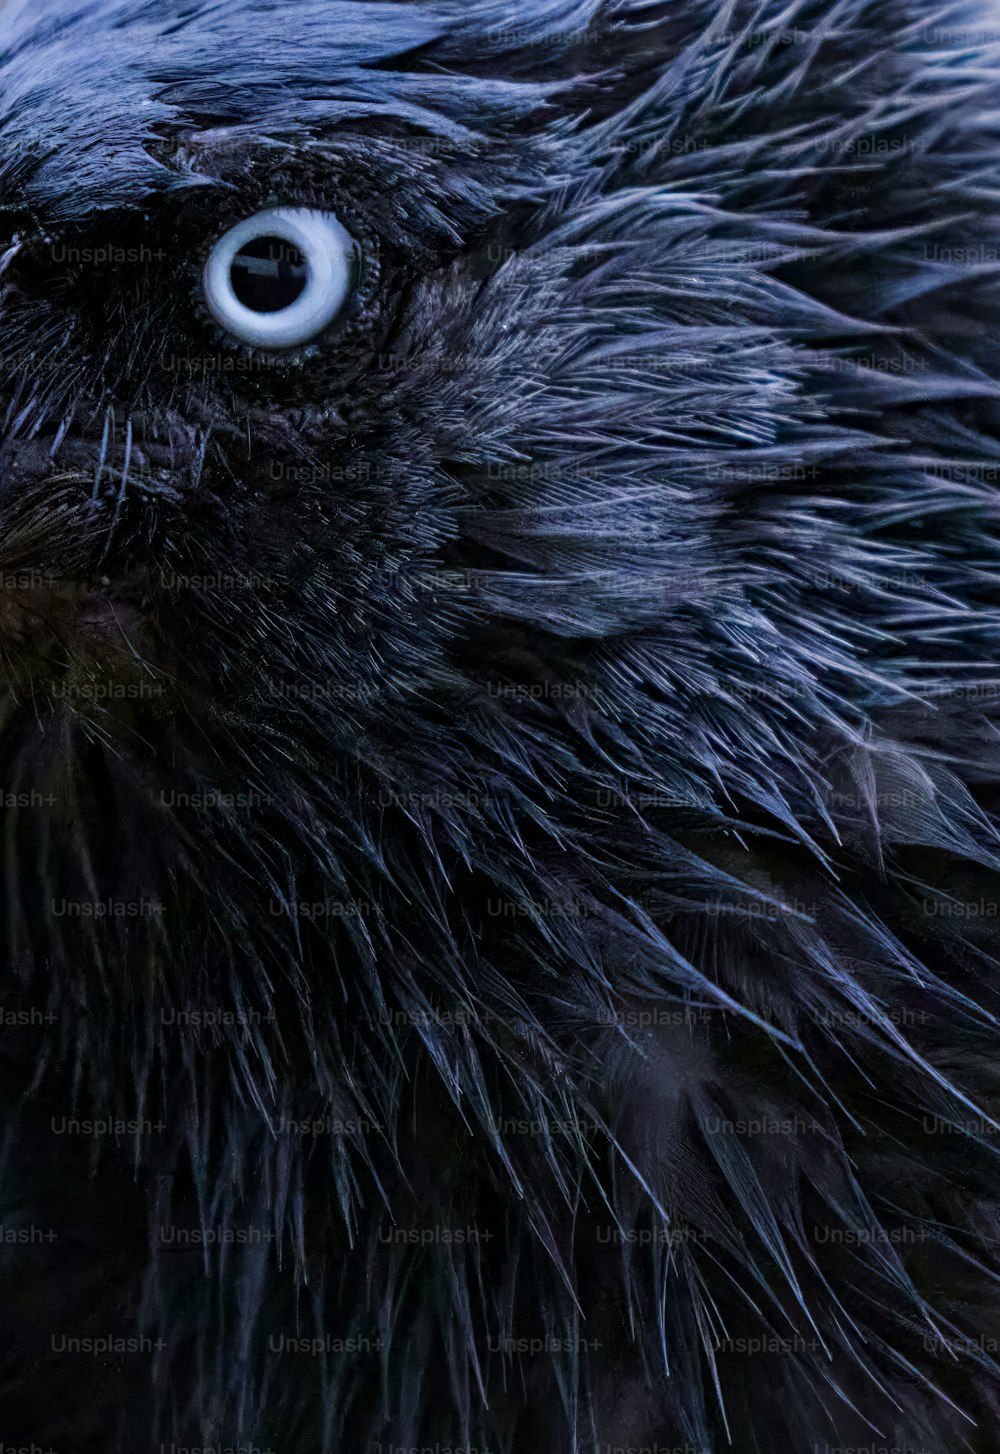 a close up of a black bird with very large eyes